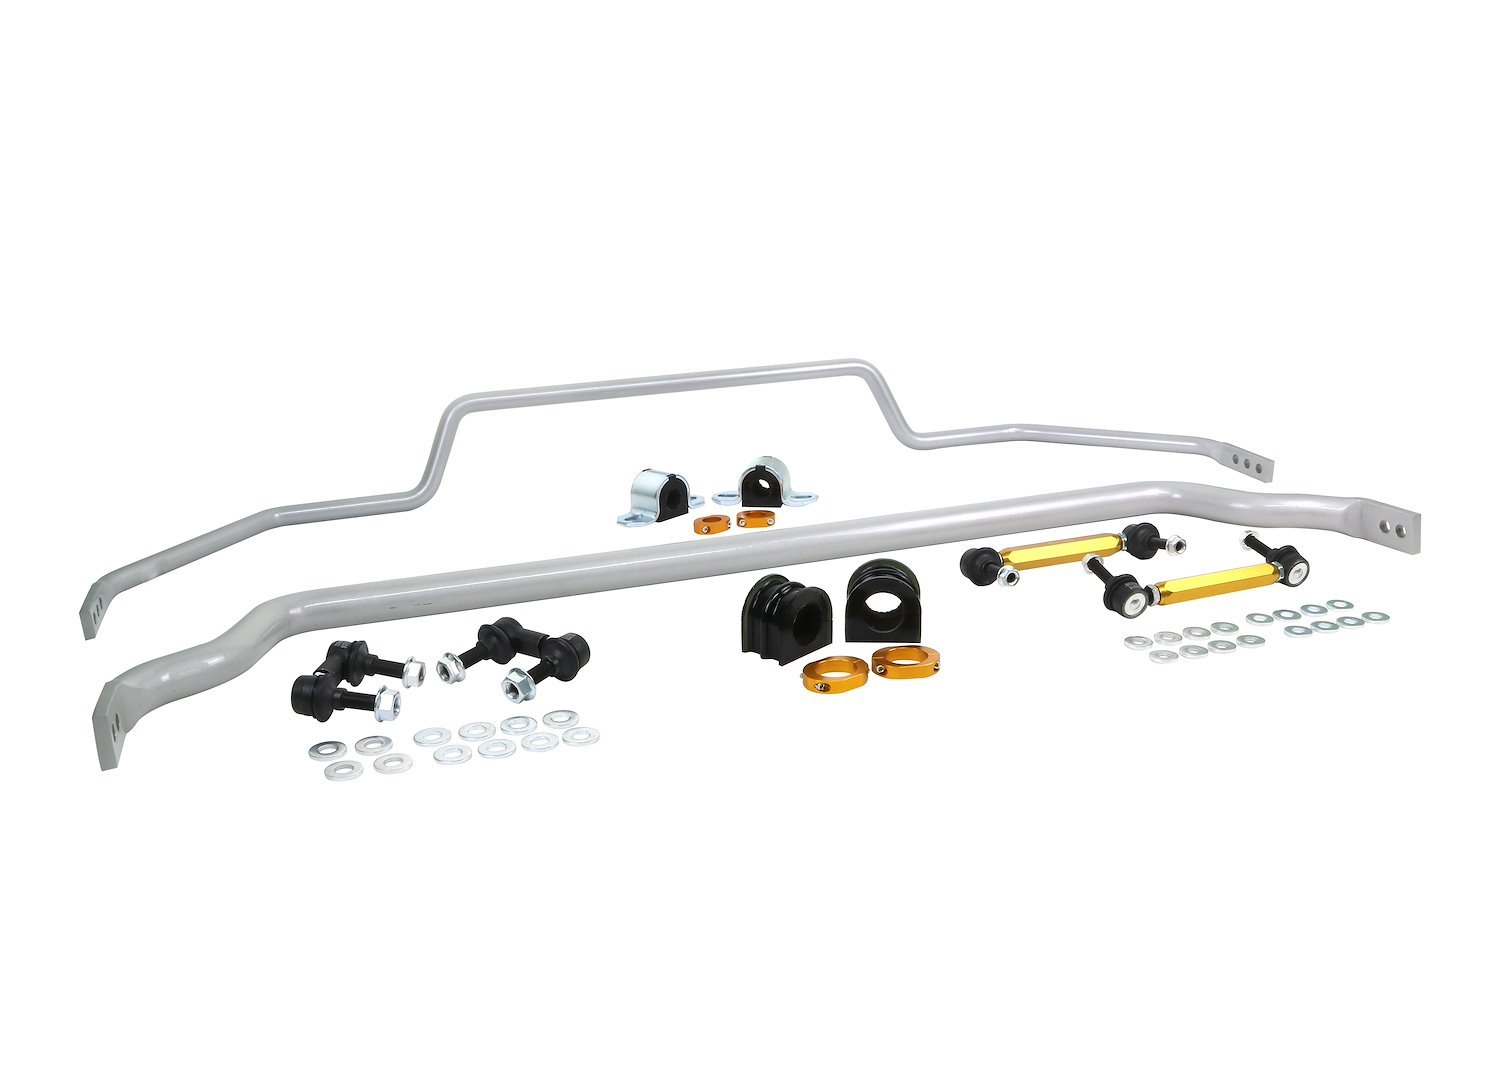 BNK008 Front and Rear Sway Bar Kit for 2009-2014 Nissan GT-R